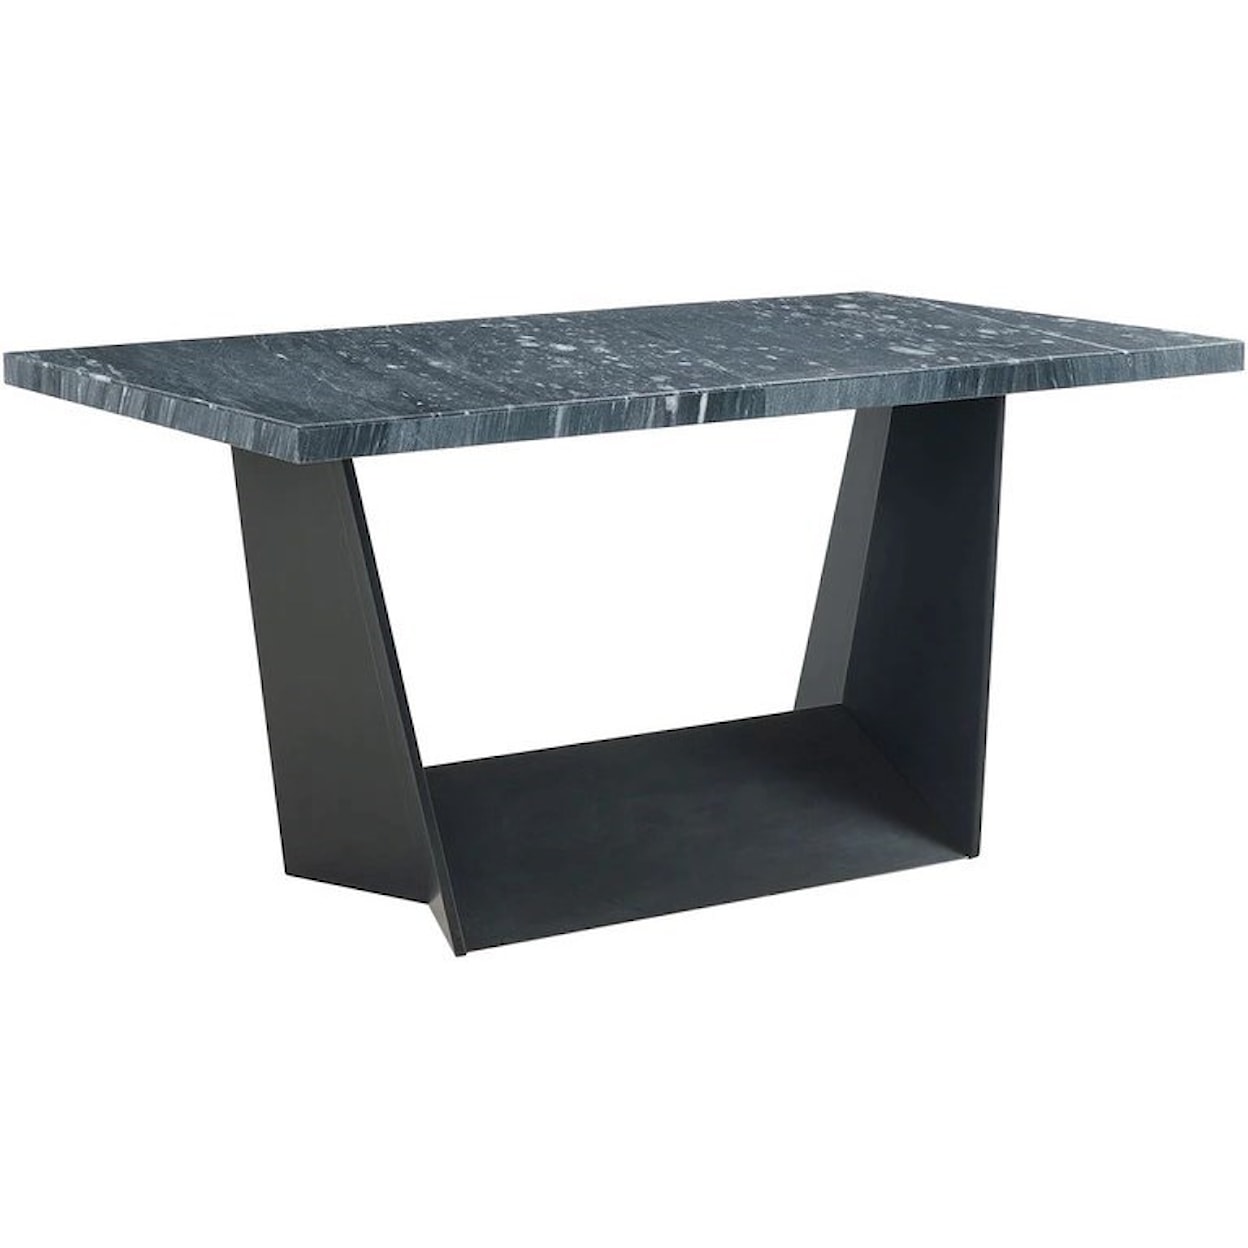 Elements International Beckley Counter Height Table